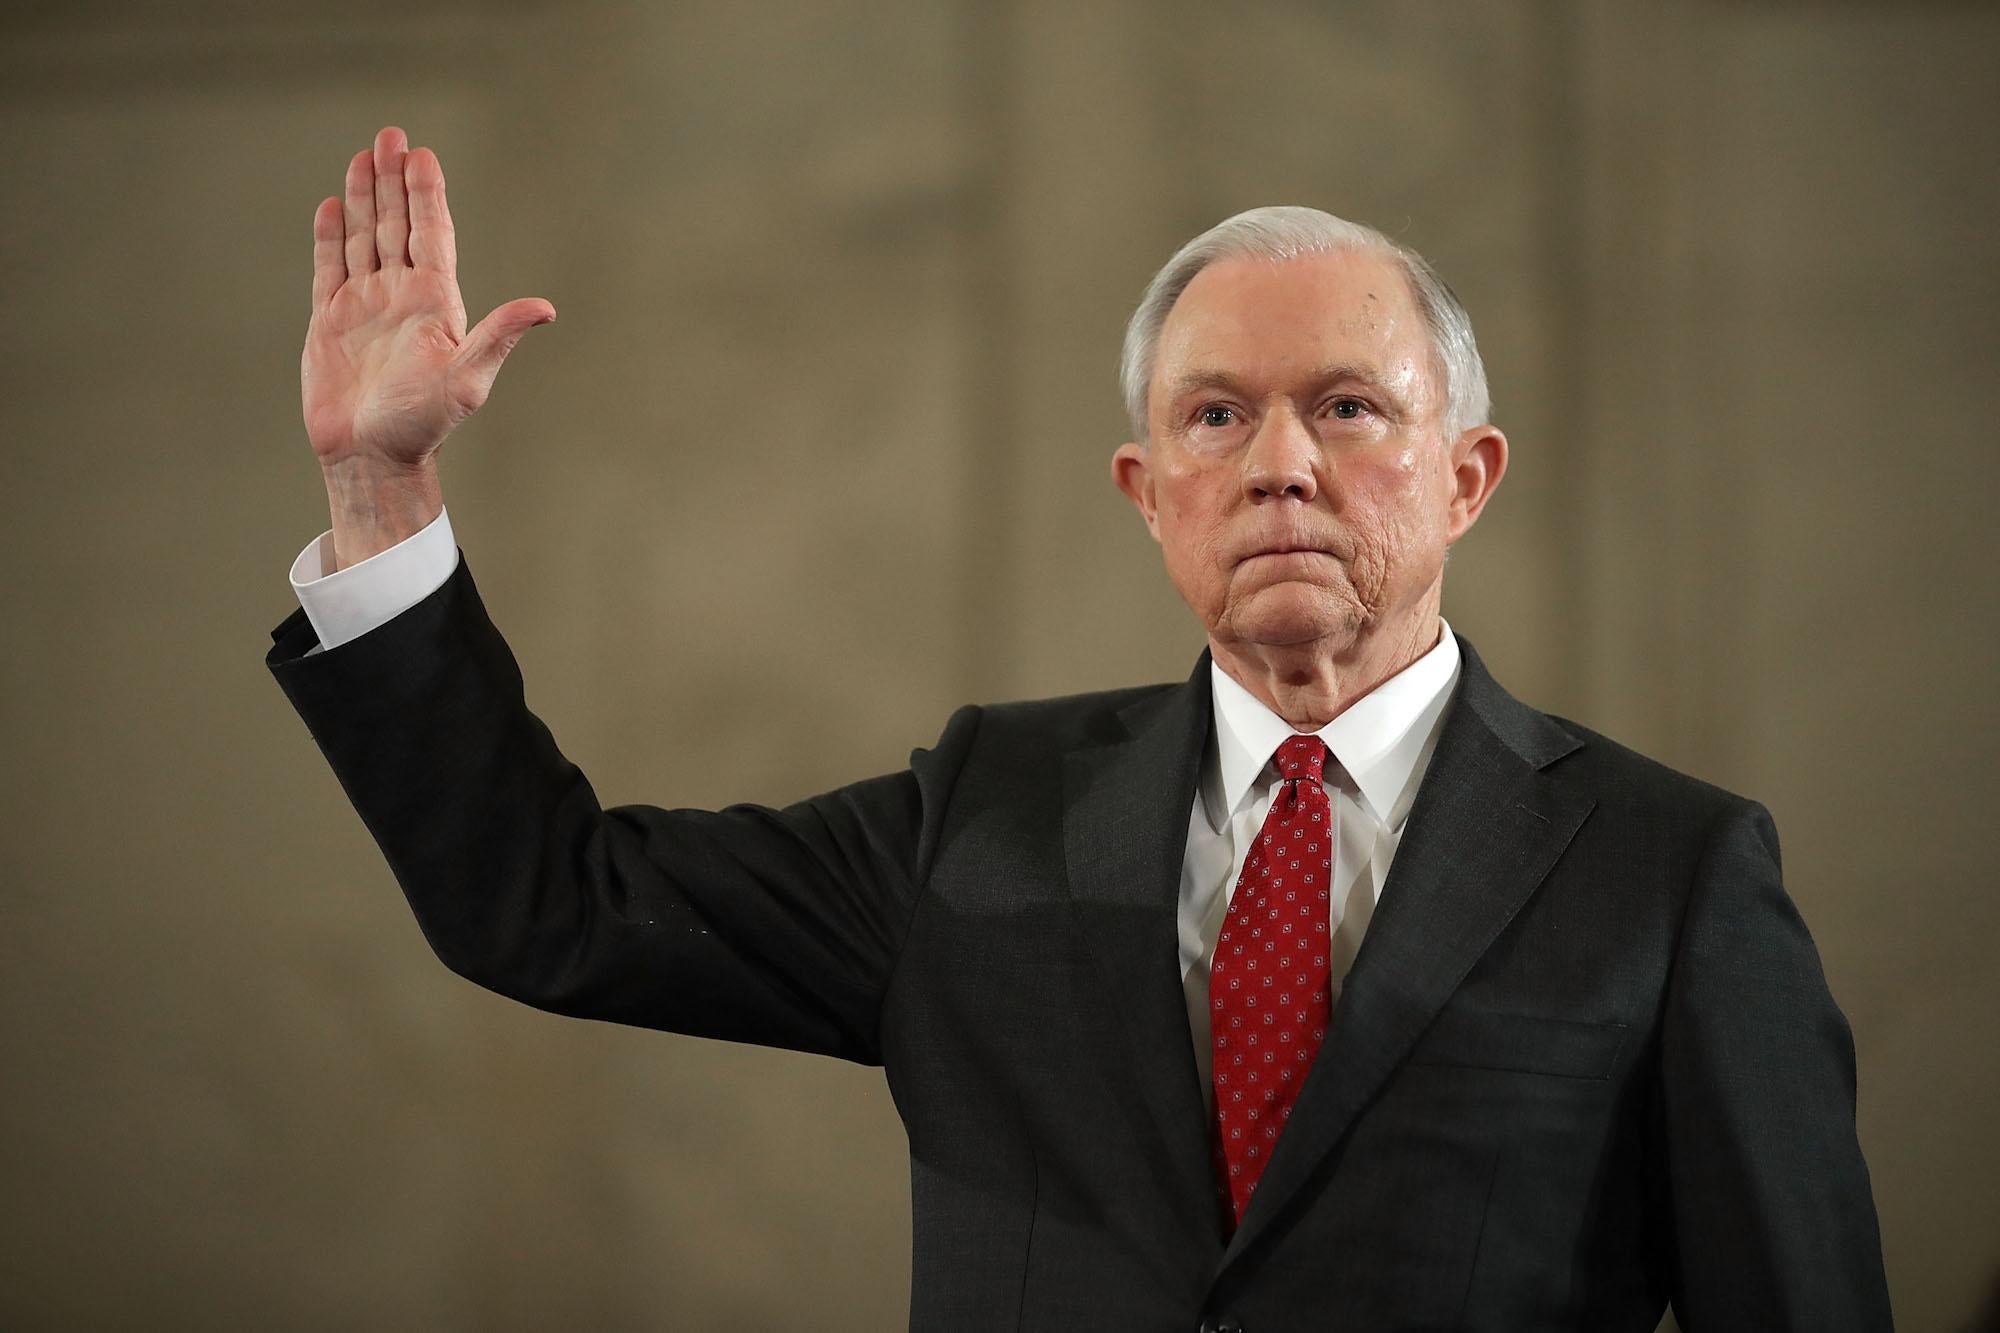 Mr Sessions took the oath before giving his statement